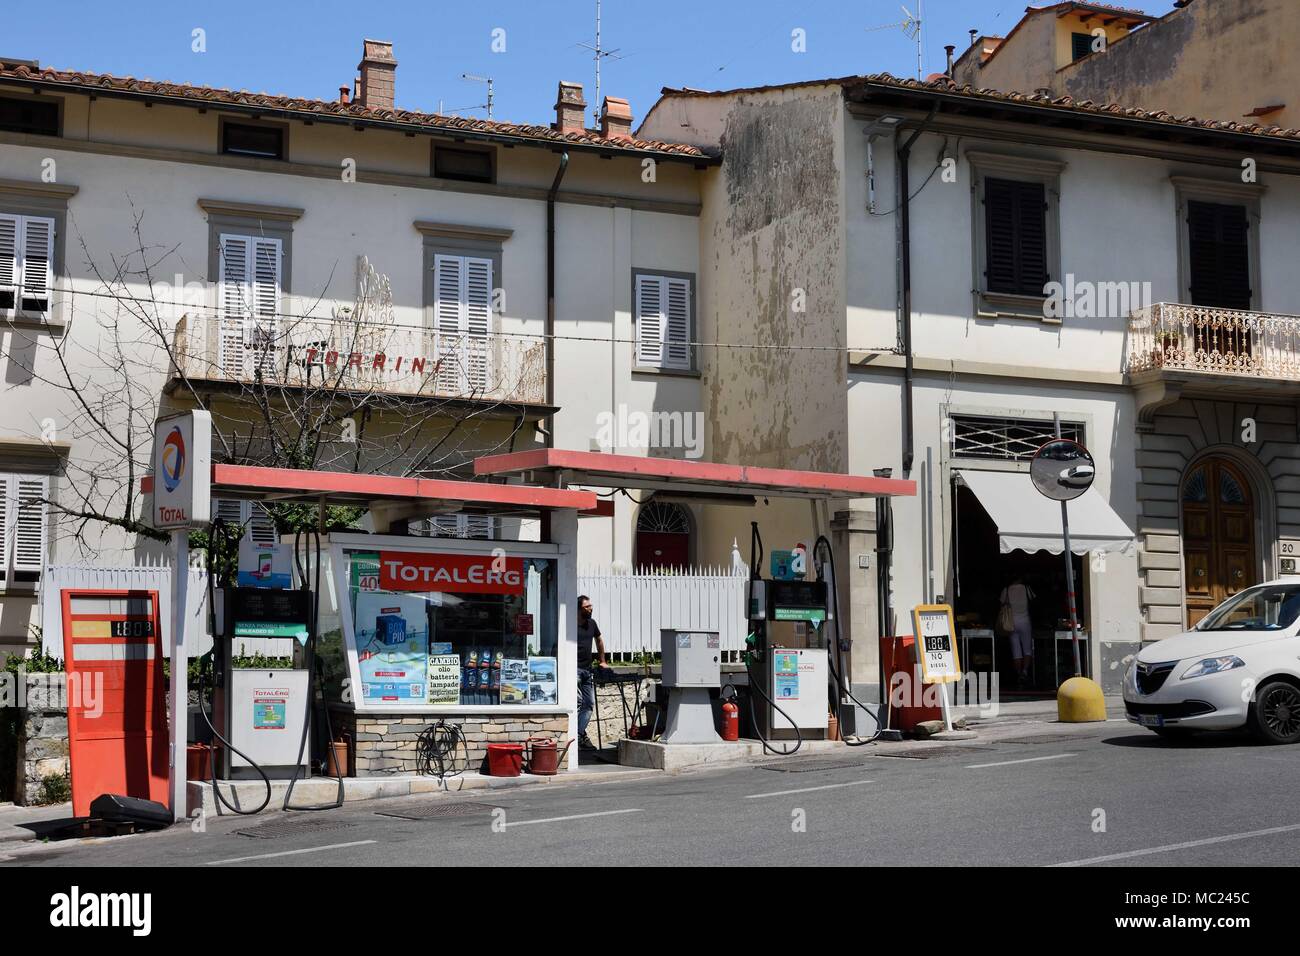 Totalerg - Total Petrol station Fiesole is a town on a scenic height above Florence, 8 kilometres (5 mi) northeast of that city. The Decameron by Giovanni Boccaccio is set in the slopes of Fiesole.Tuscany, Italy - Italian. Stock Photo